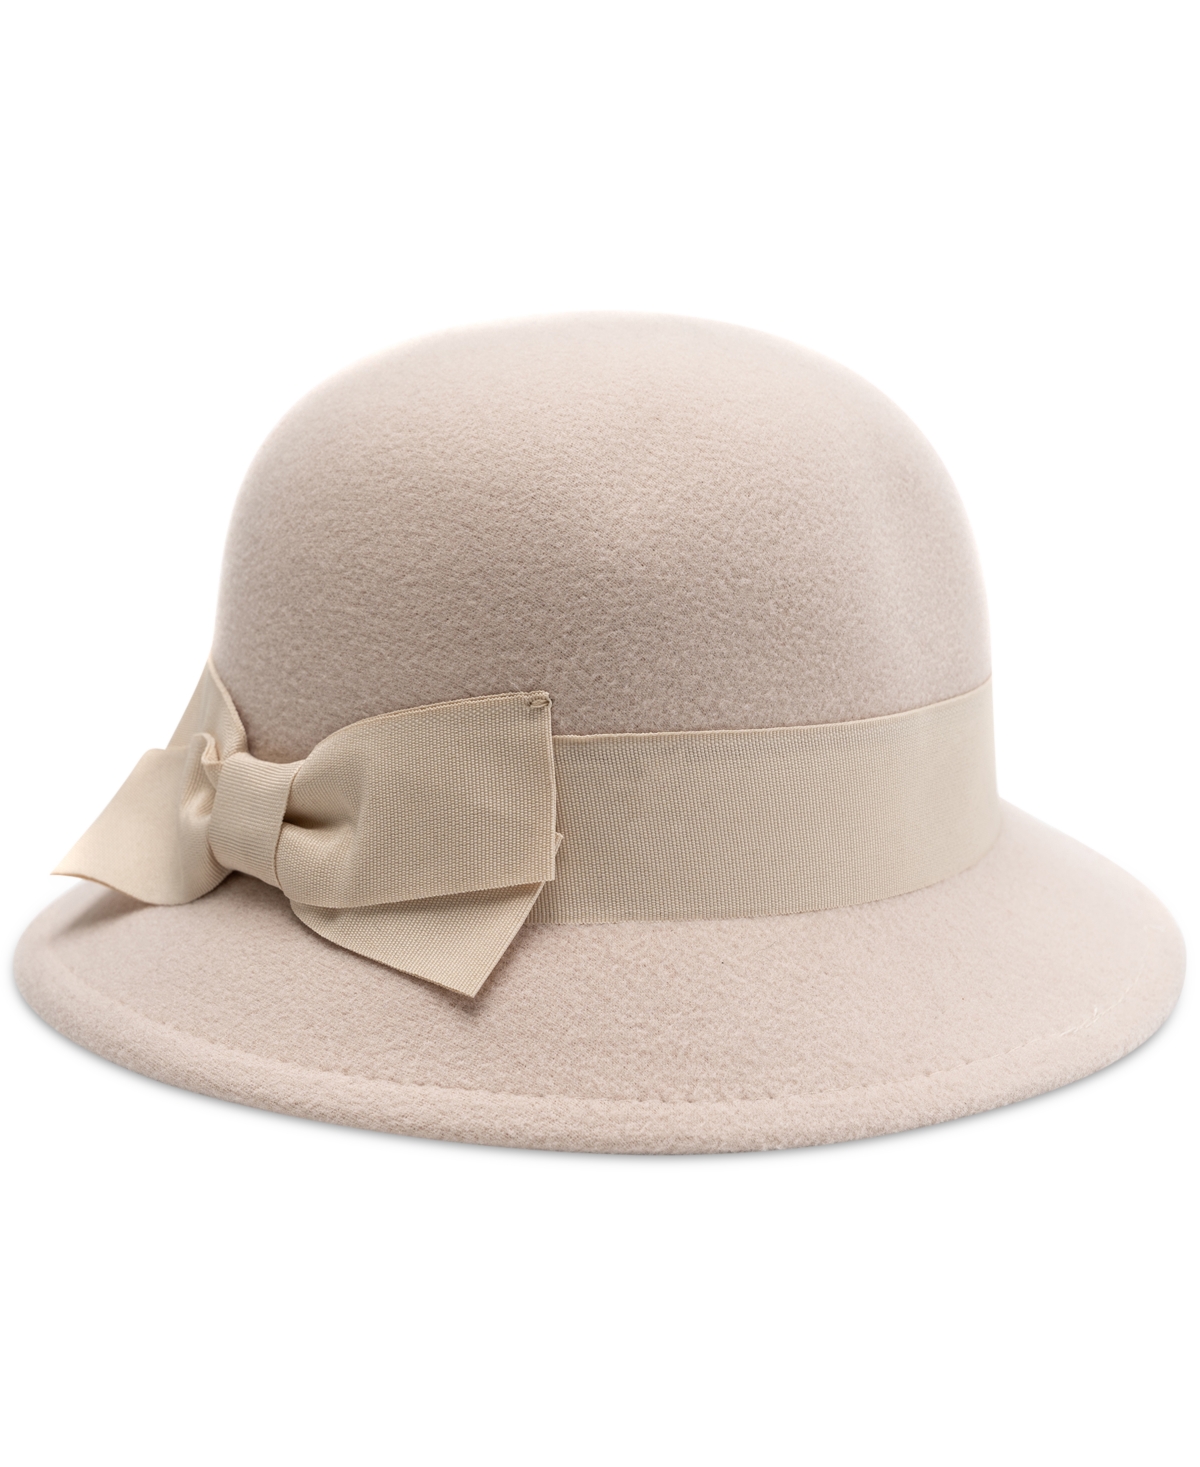 Women's Felt Bow Cloche Hat, Created for Macy's - Taupe